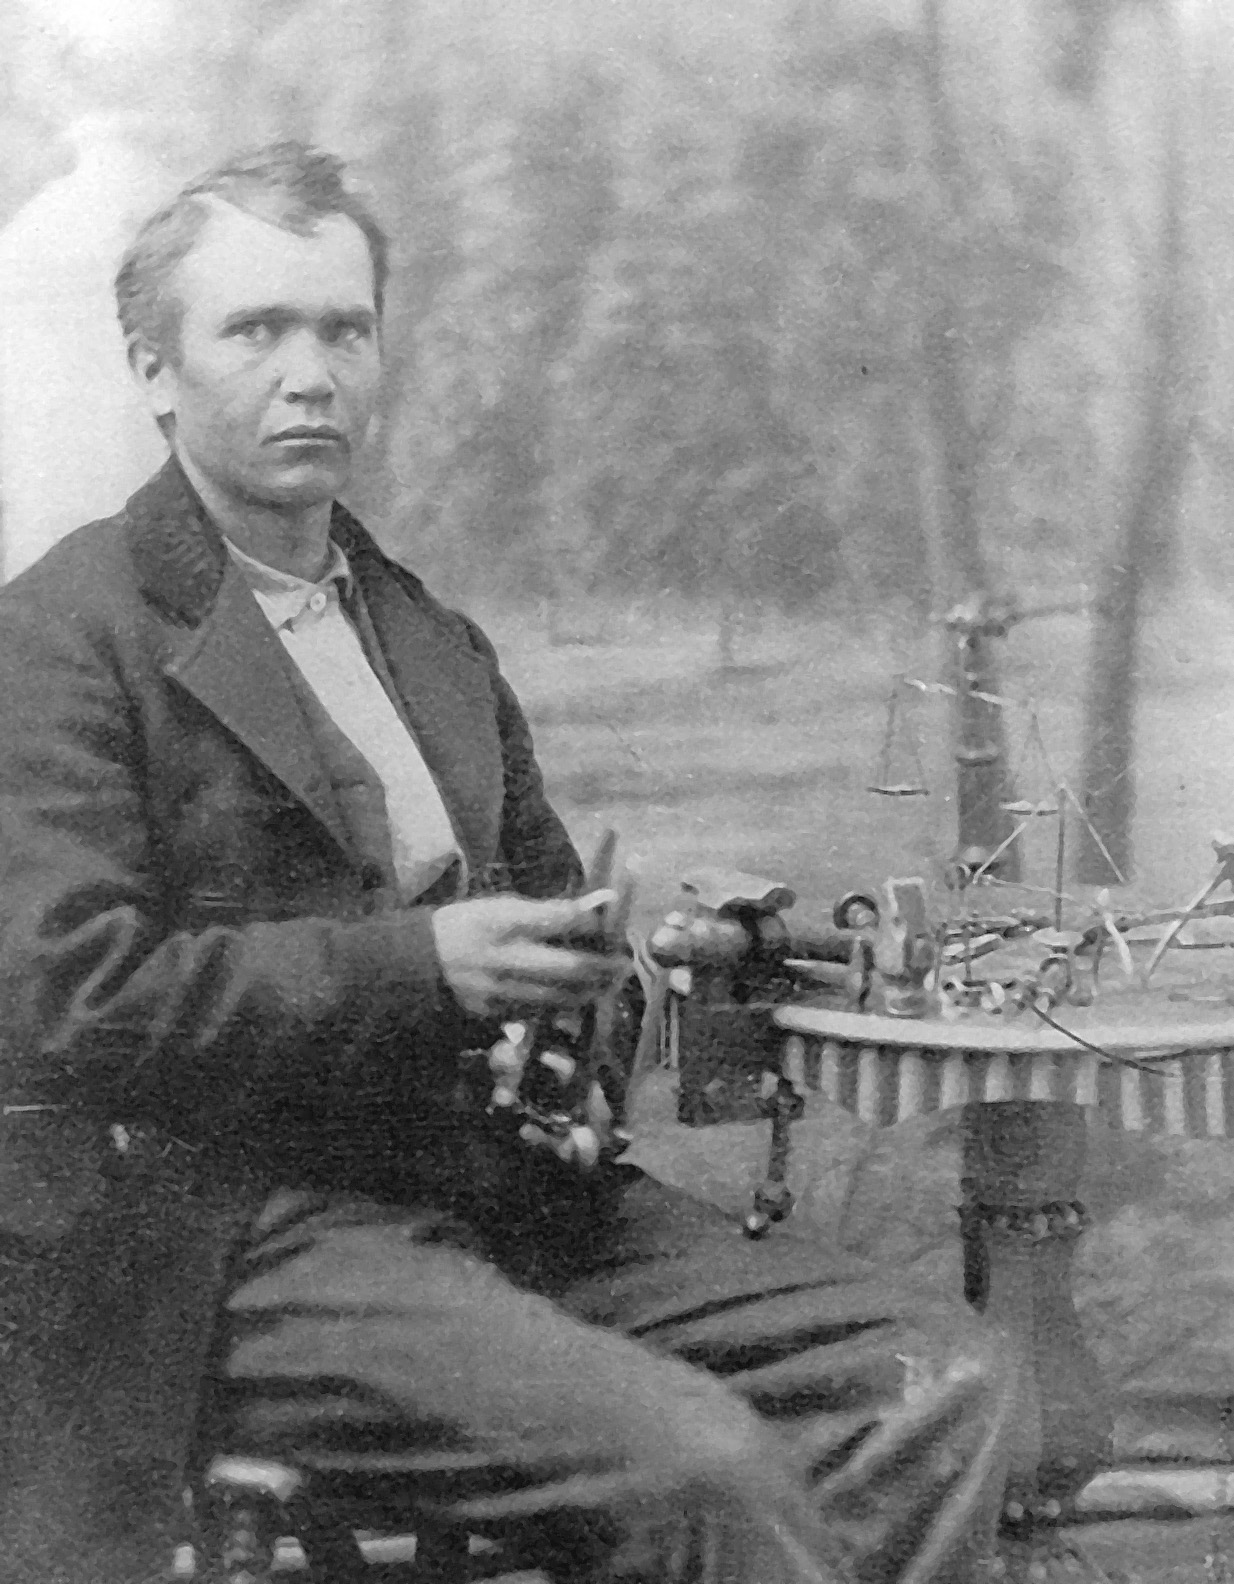 Guðmundur Guðmundsson pictured with his goldsmith tools. He was trained as a  goldsmith in Denmark, where he joined the Latterday Saint Church. Courtesy of  Ralph Abraham Trane, great-grandson of Guðmundur Guðmundsson